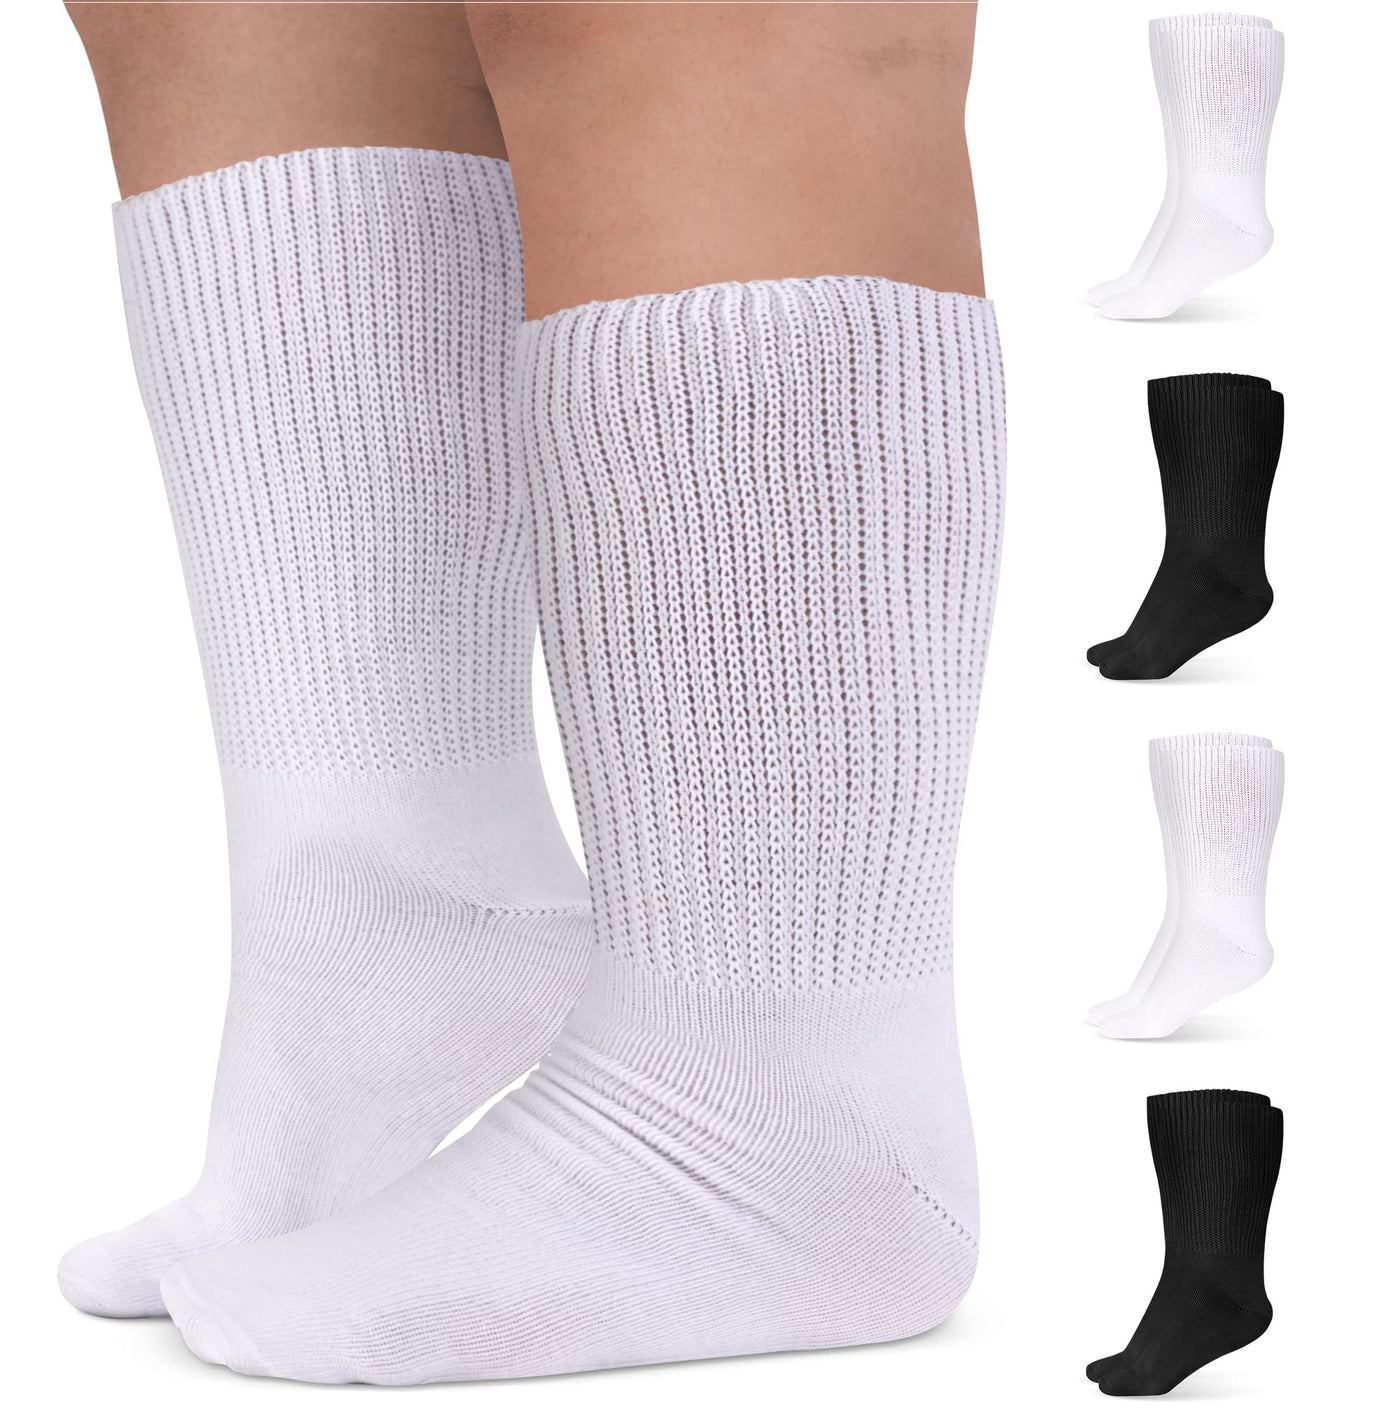  Pembrook Extra Wide Socks for Swollen Feet - 4 Pair